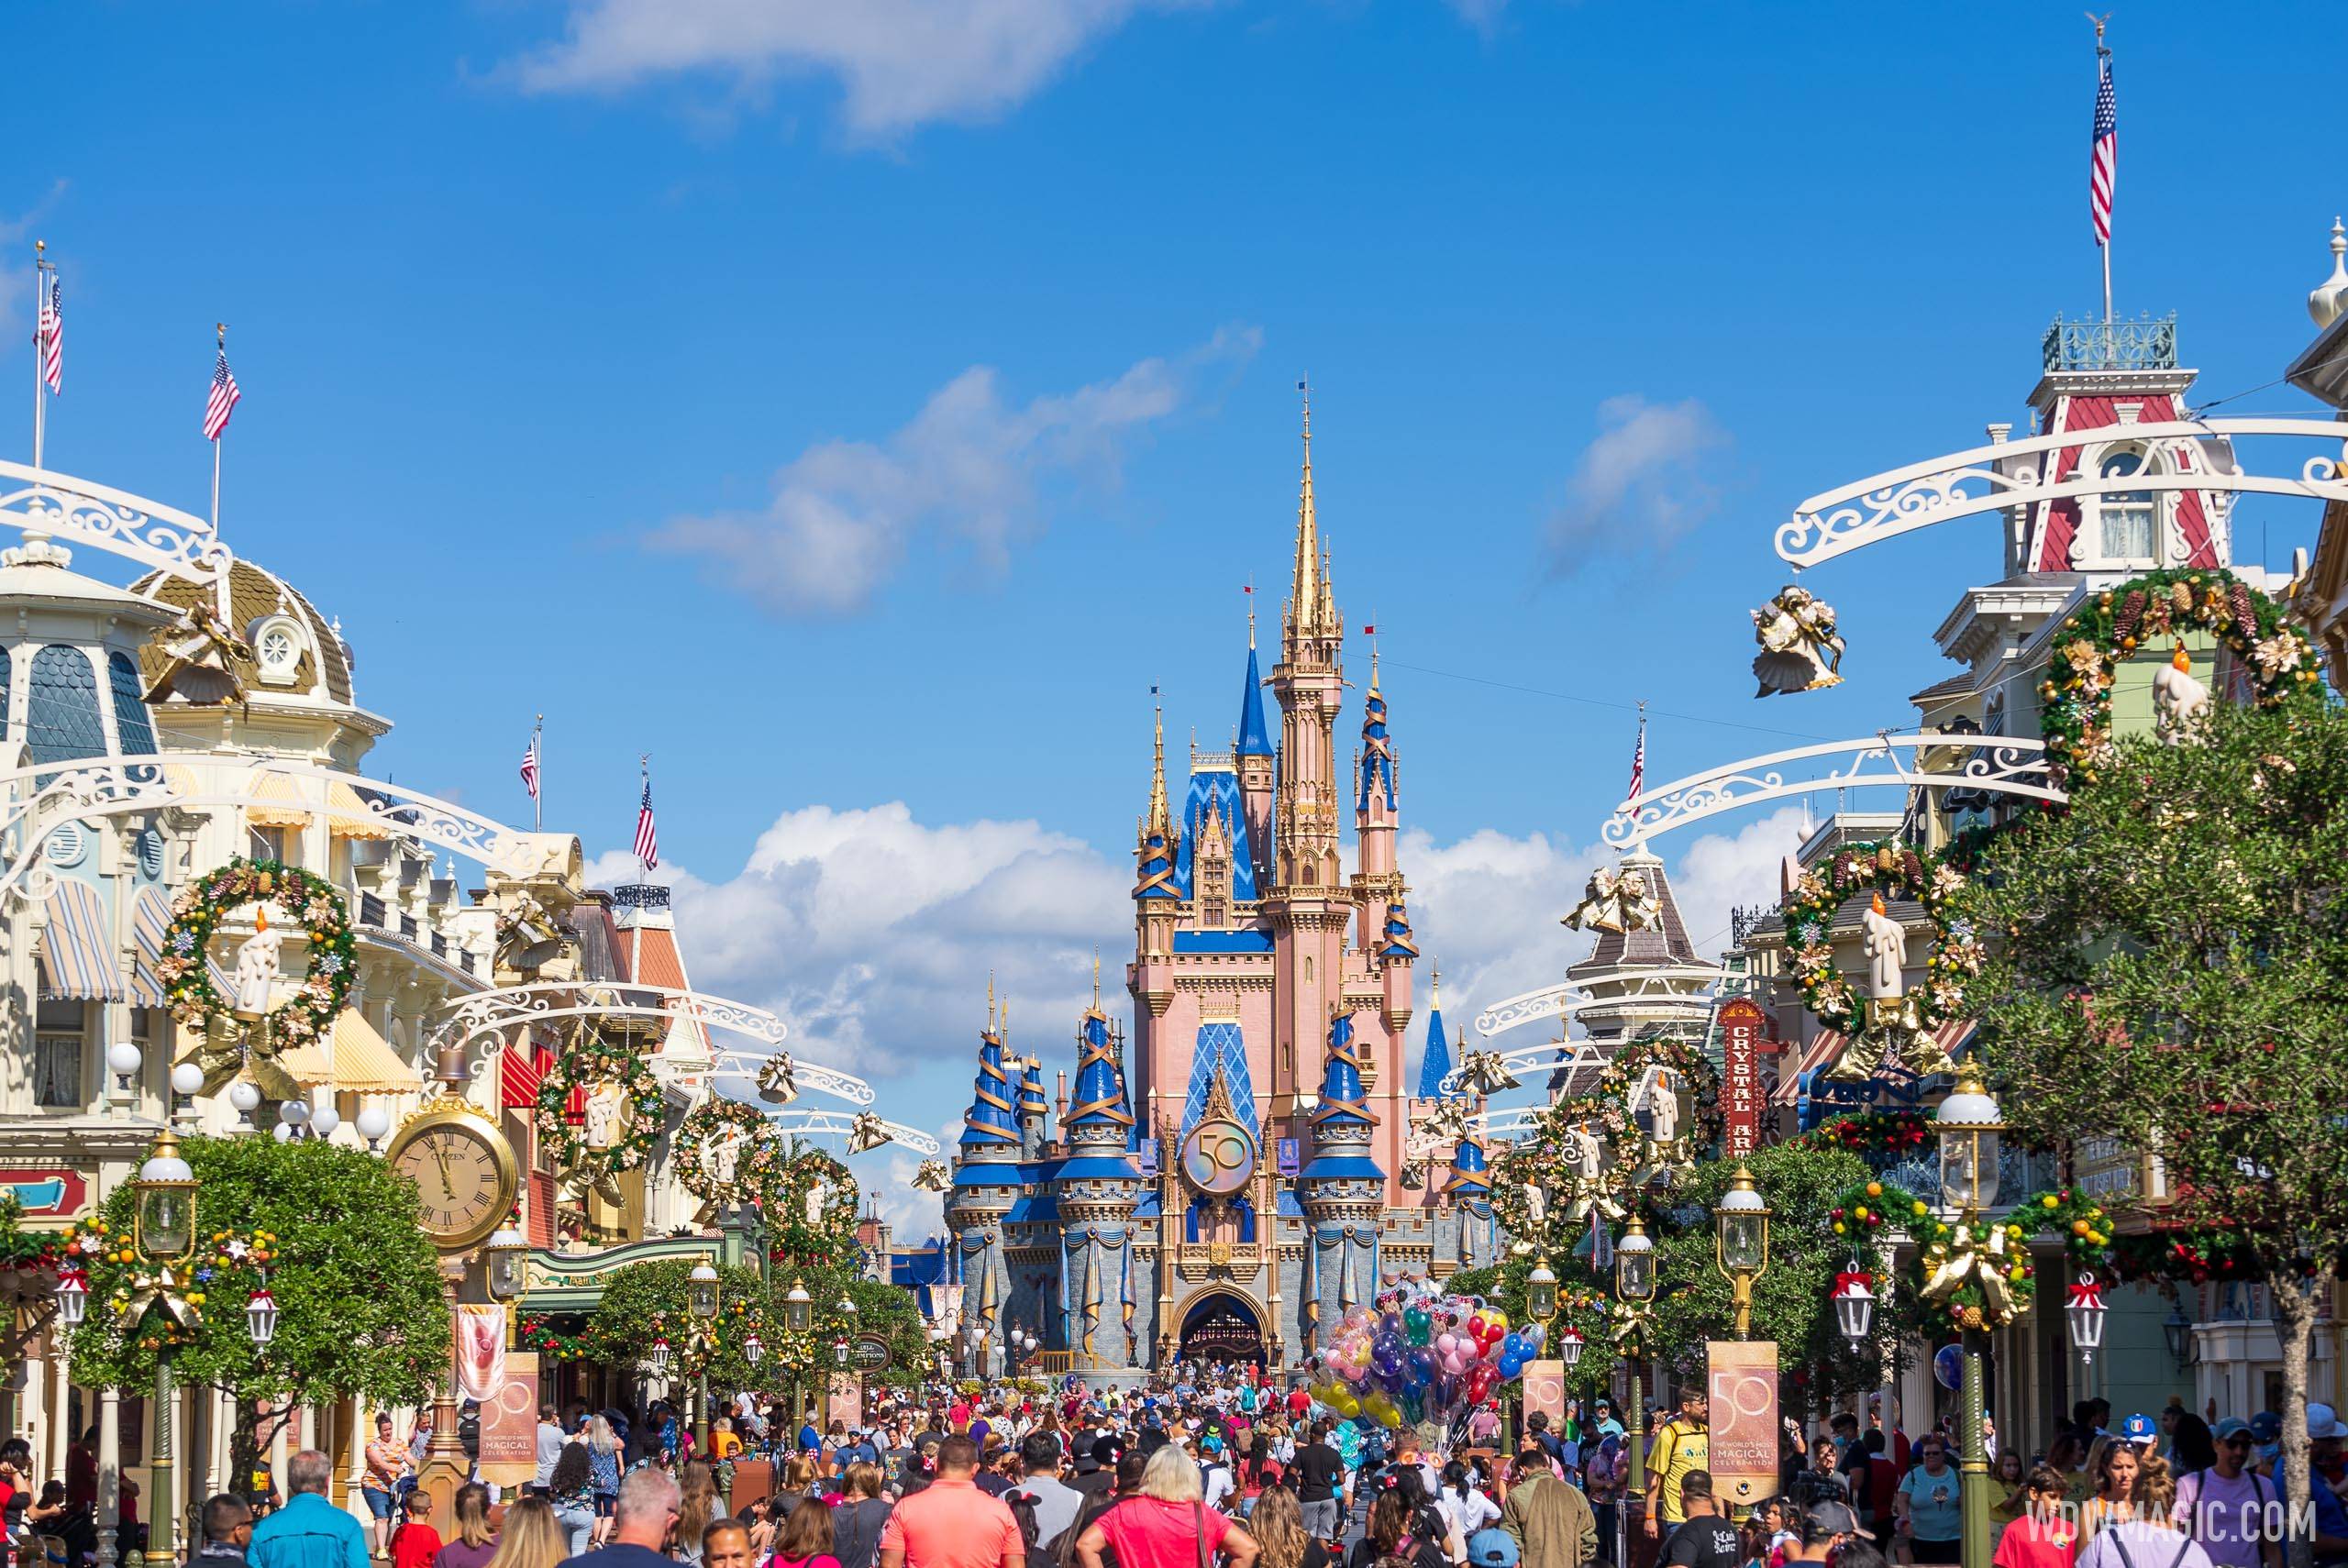 Magic Kingdom will be a busy place during the upcoming Thanksgiving week